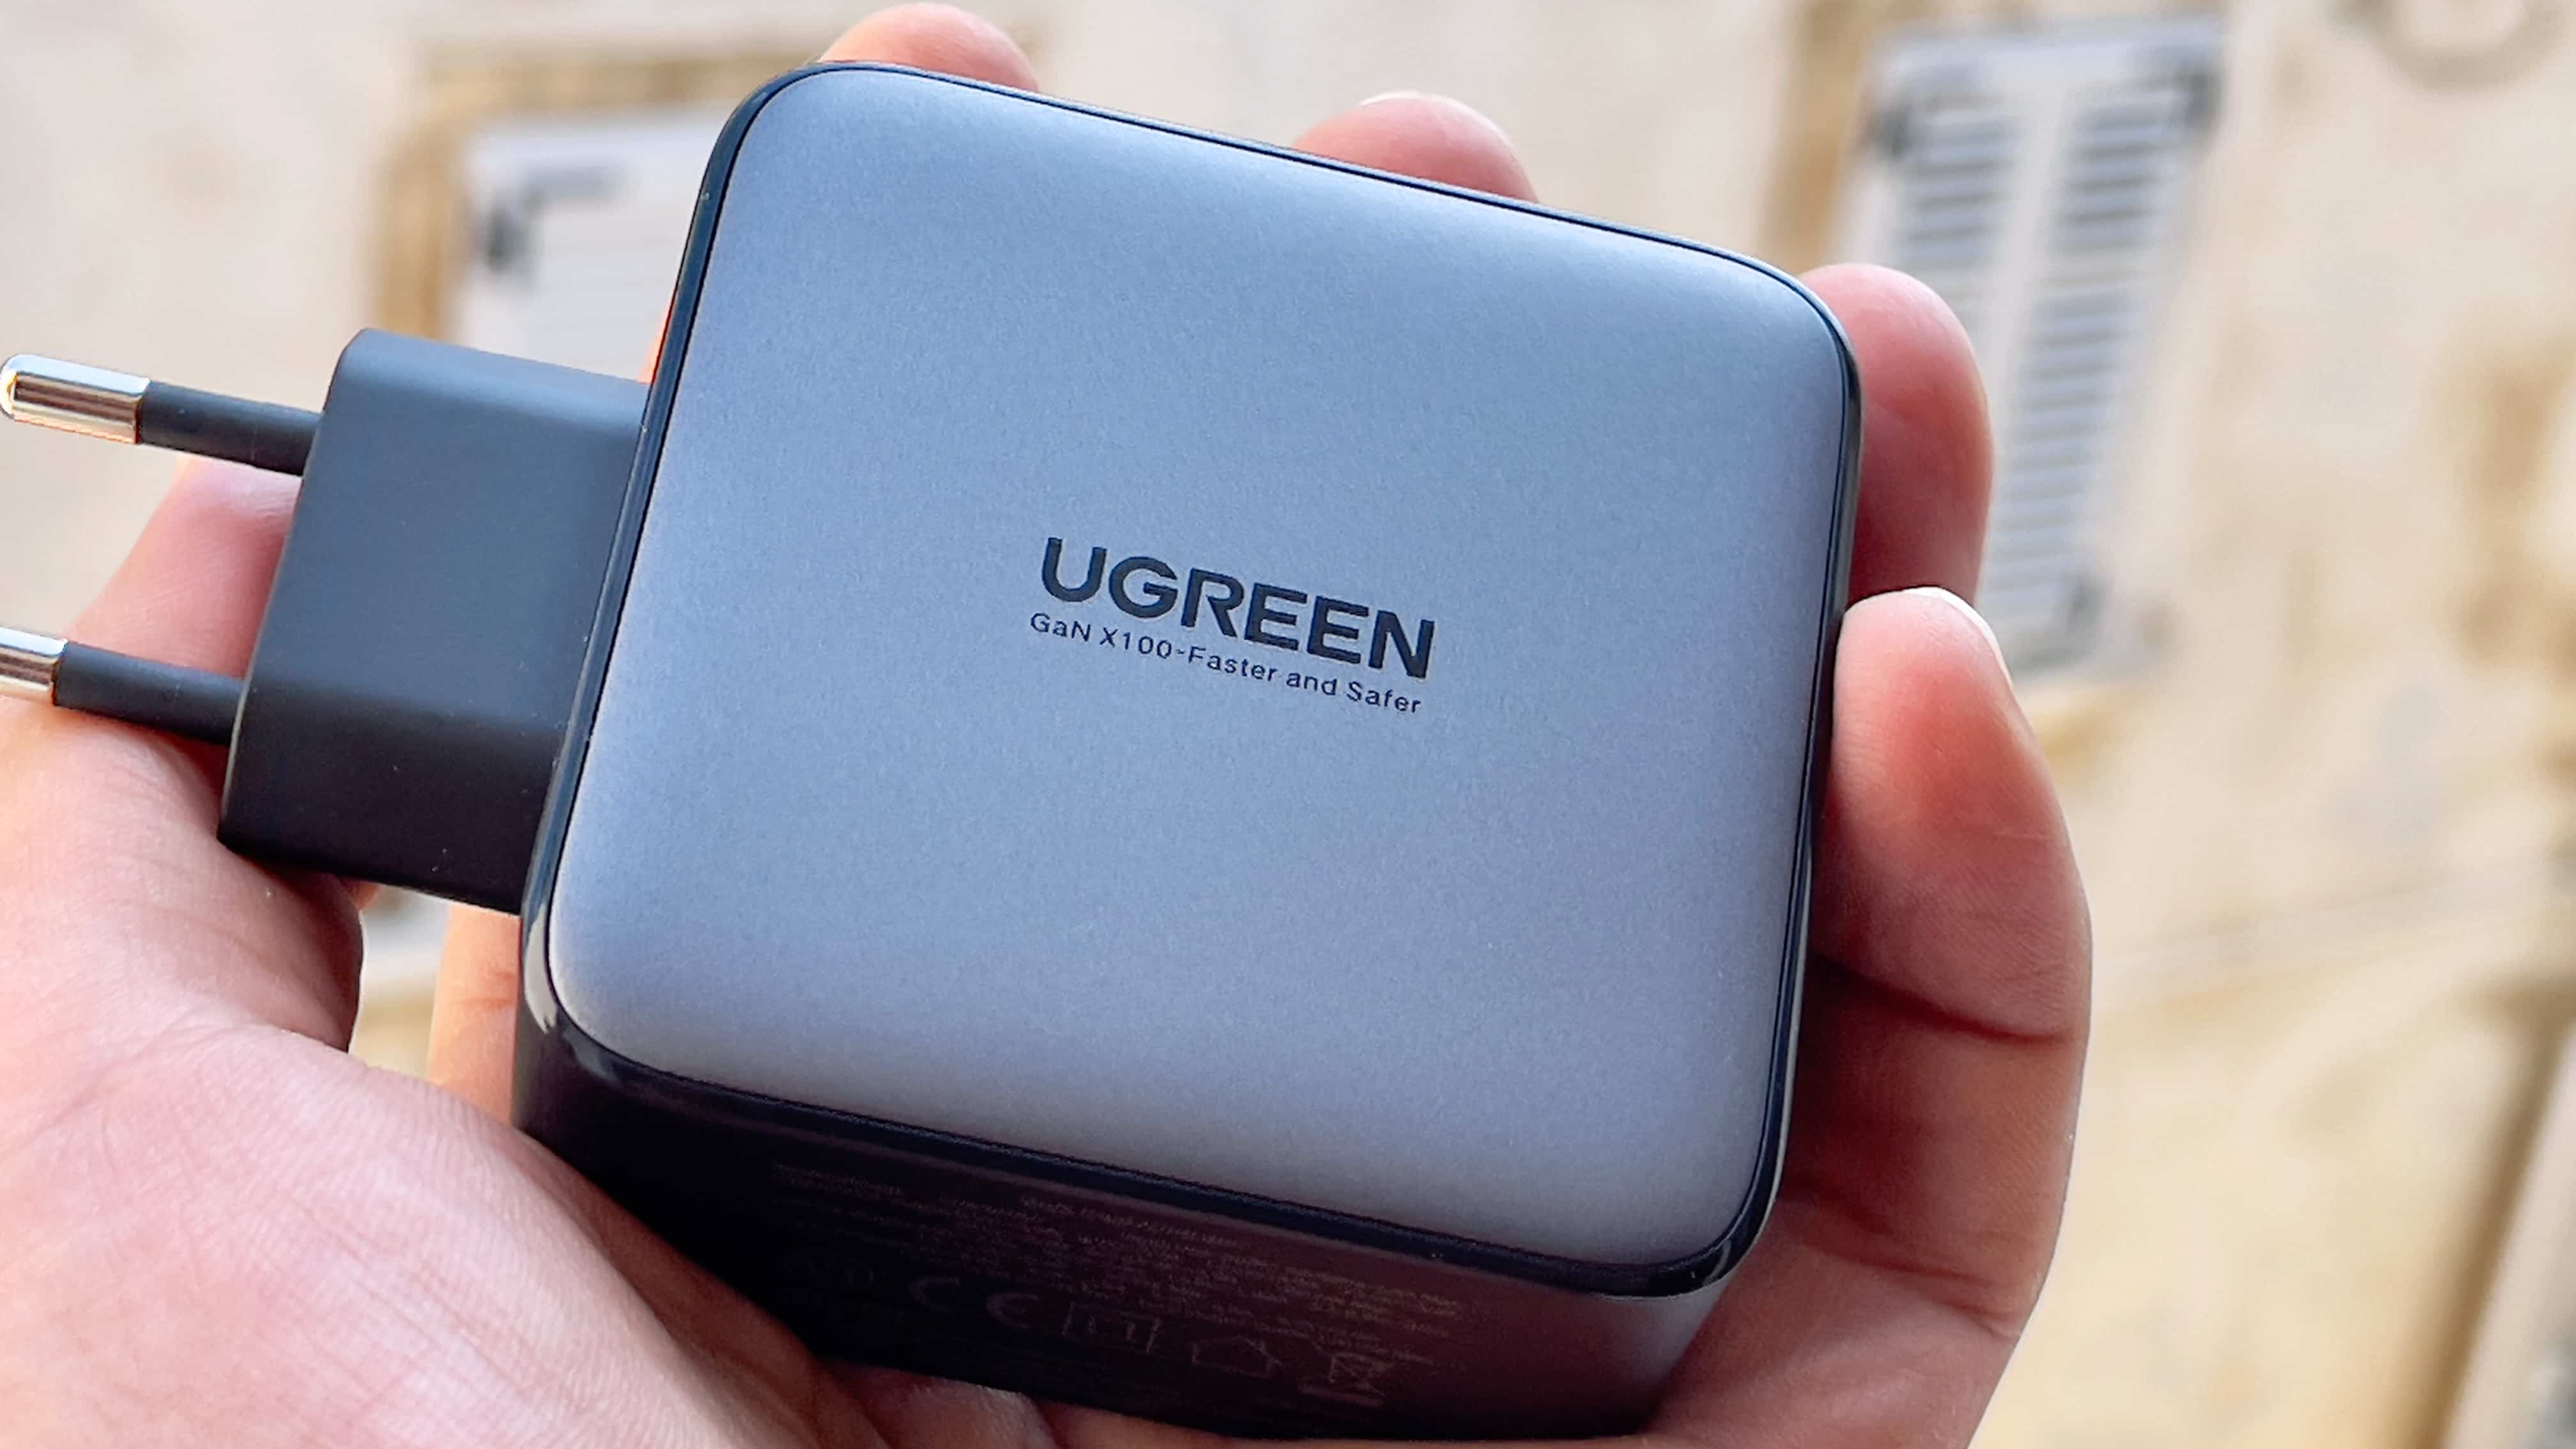 Power your Black Friday with big savings on Ugreen’s chargers and accessories